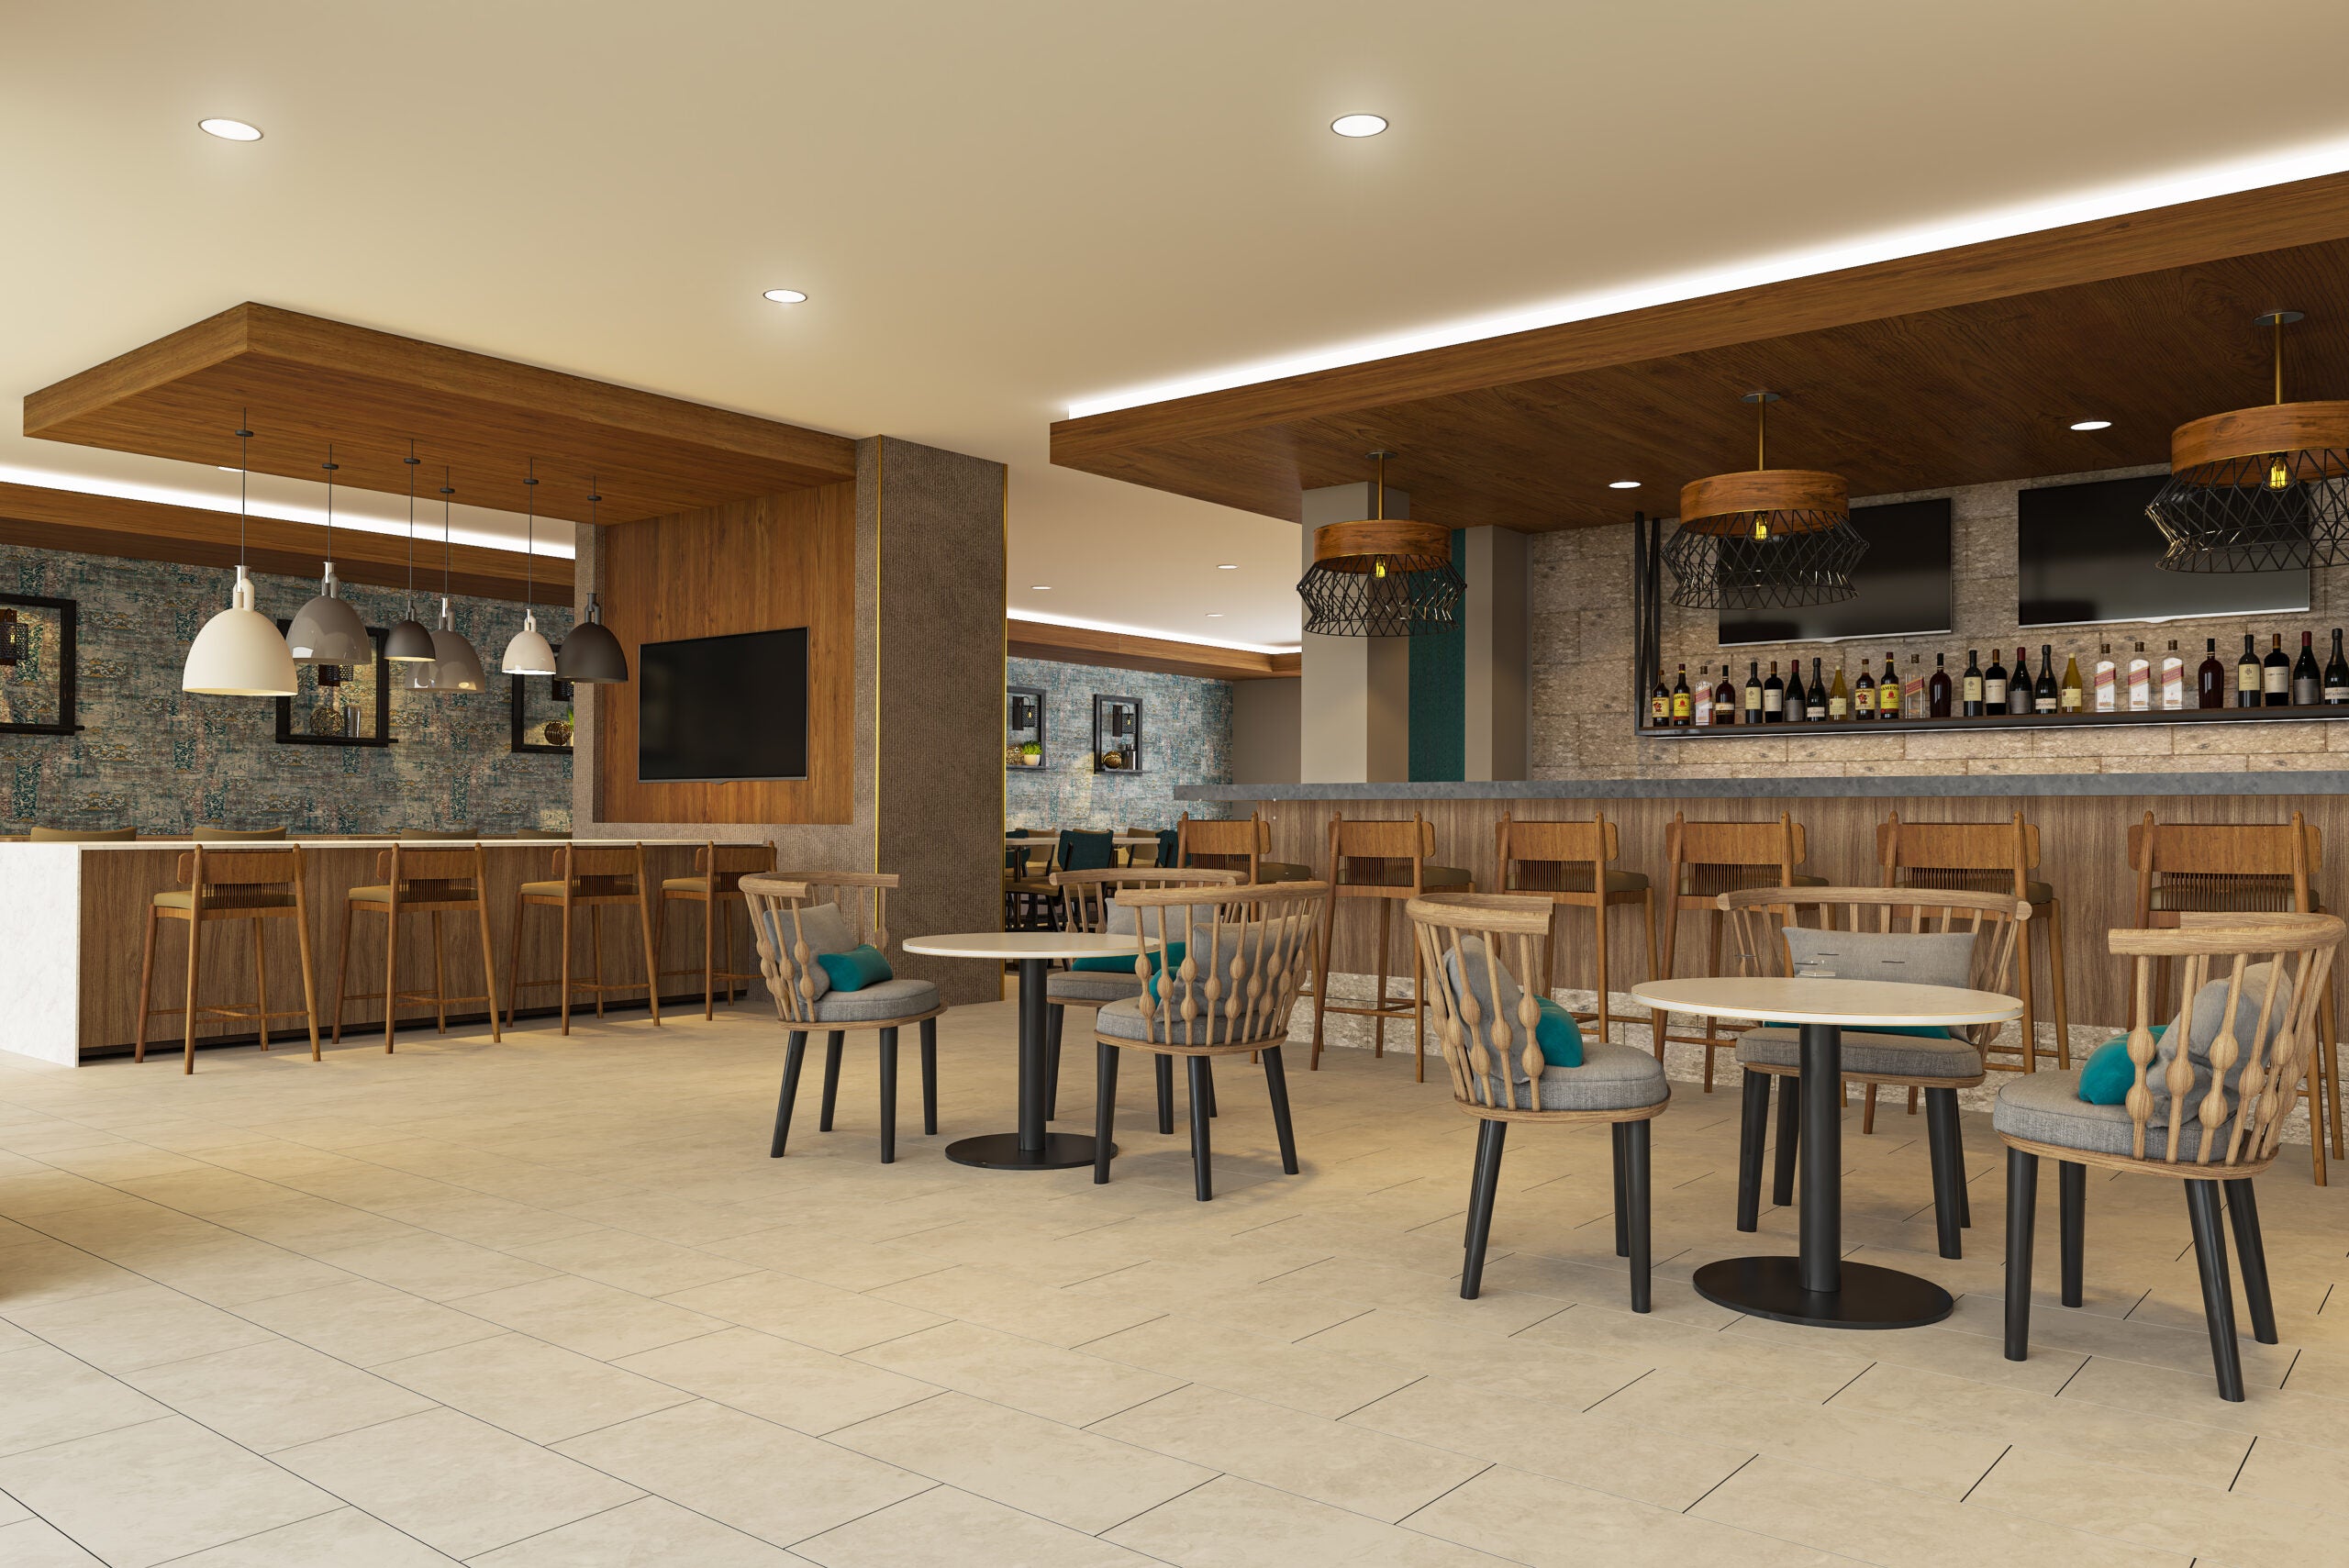 Marriott opens first Fairfield brand property in Costa Rica